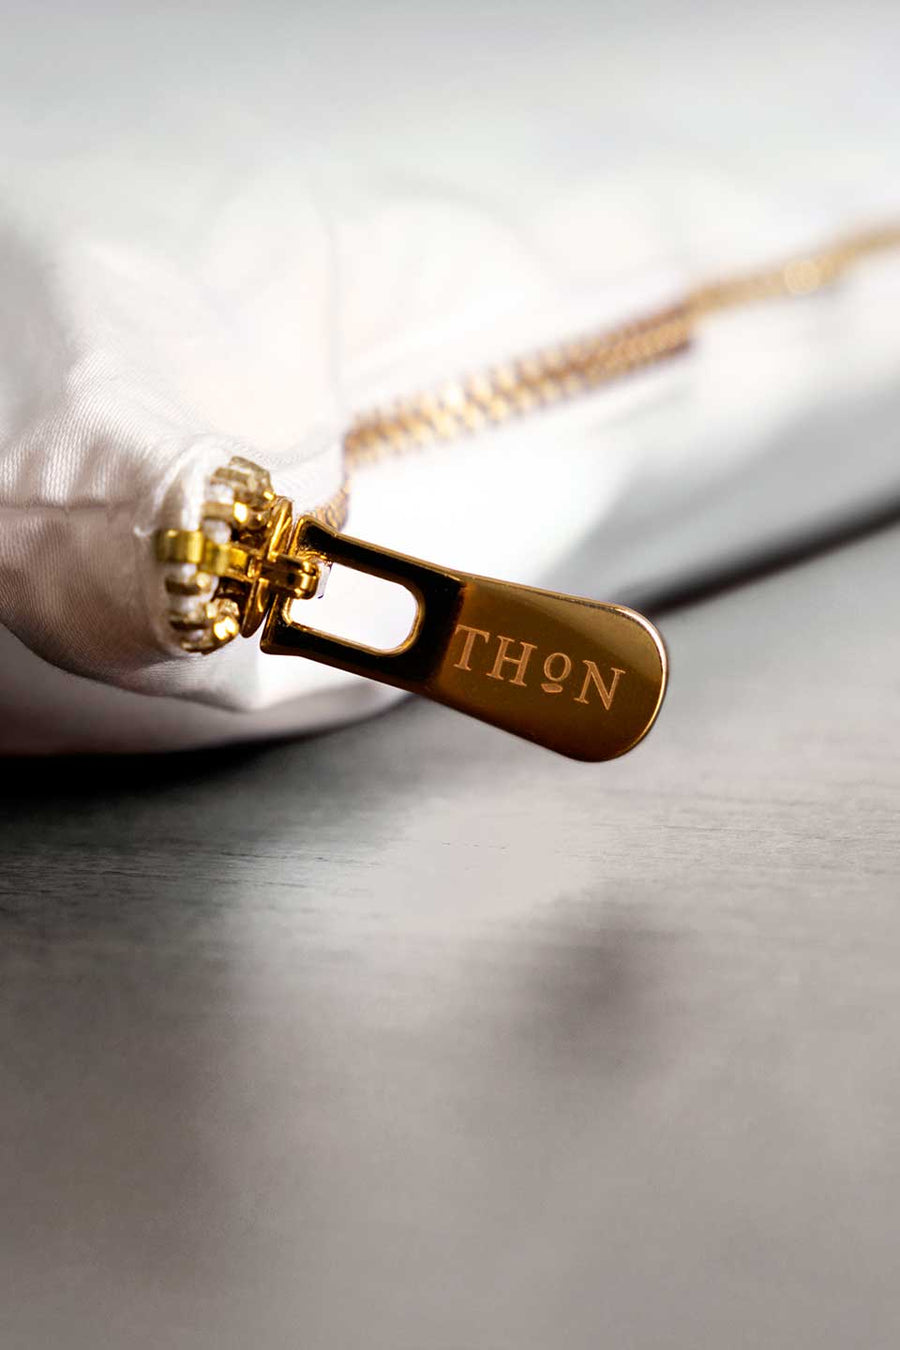 Golden zipper in eco-friendly packaging in Egyptian Cotton™ Sateen from THON.